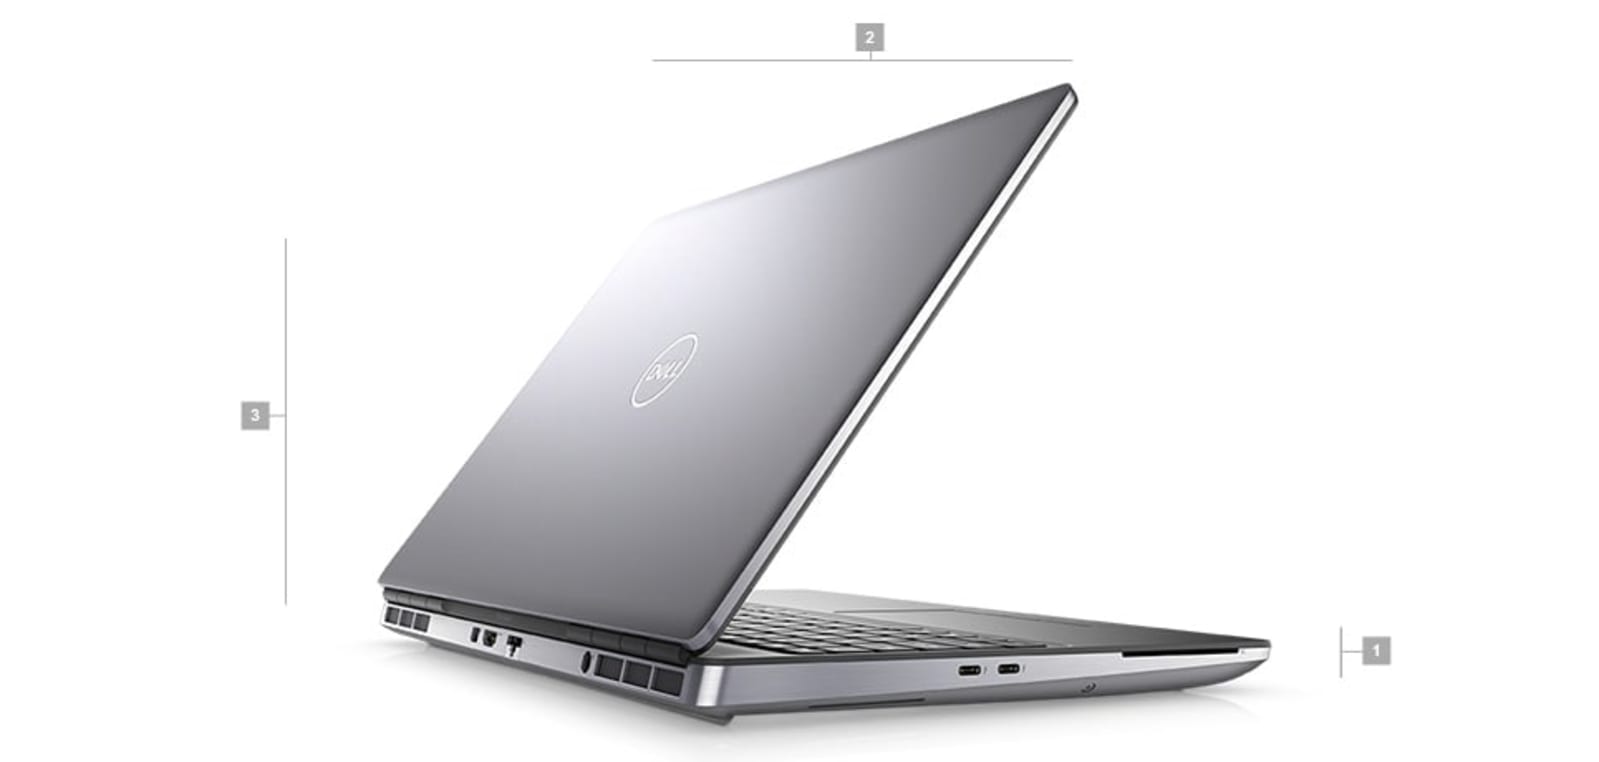 Restored Dell Precision 7000 7560 Workstation Laptop (2021) | 15.6" FHD Touch | Core i5 - 256GB SSD + 256GB SSD - 8GB RAM | 6 Cores @ 4.6 GHz - 11th Gen CPU (Refurbished) - image 1 of 11